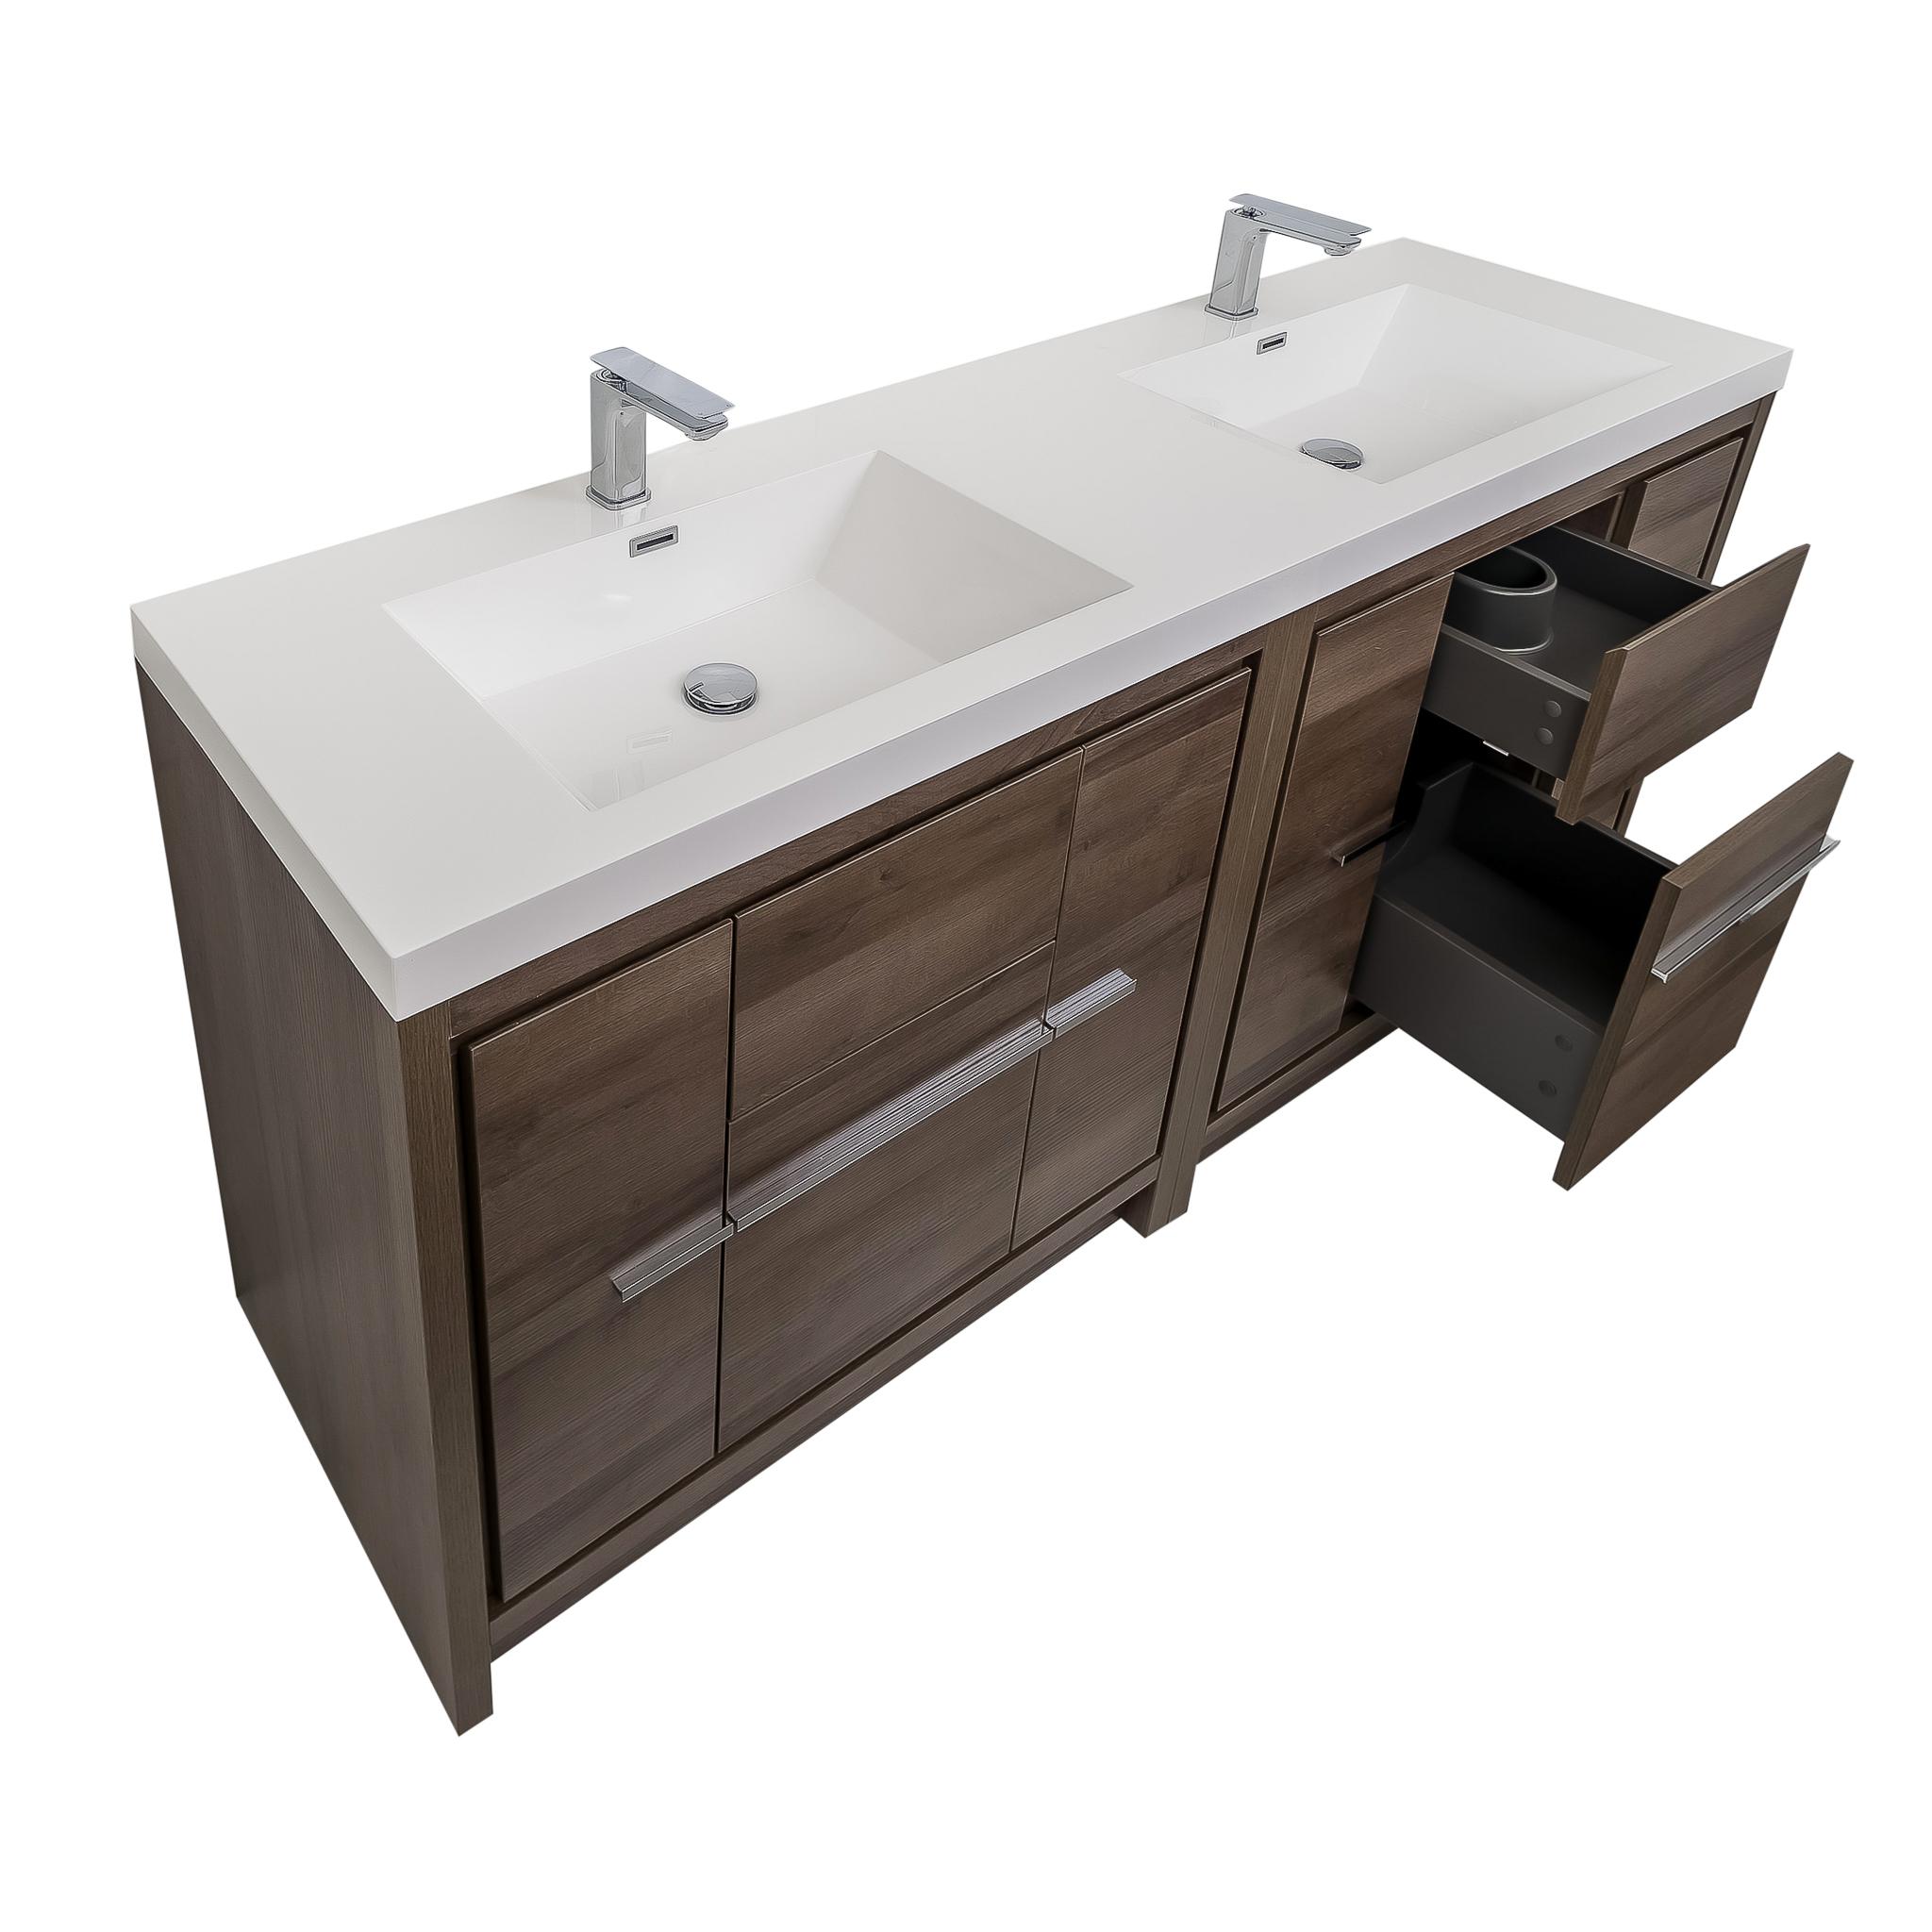 Granada 71 Brown Oak With Chrome Handle Cabinet, Square Cultured Marble Double Sink, Free Standing Modern Vanity Set